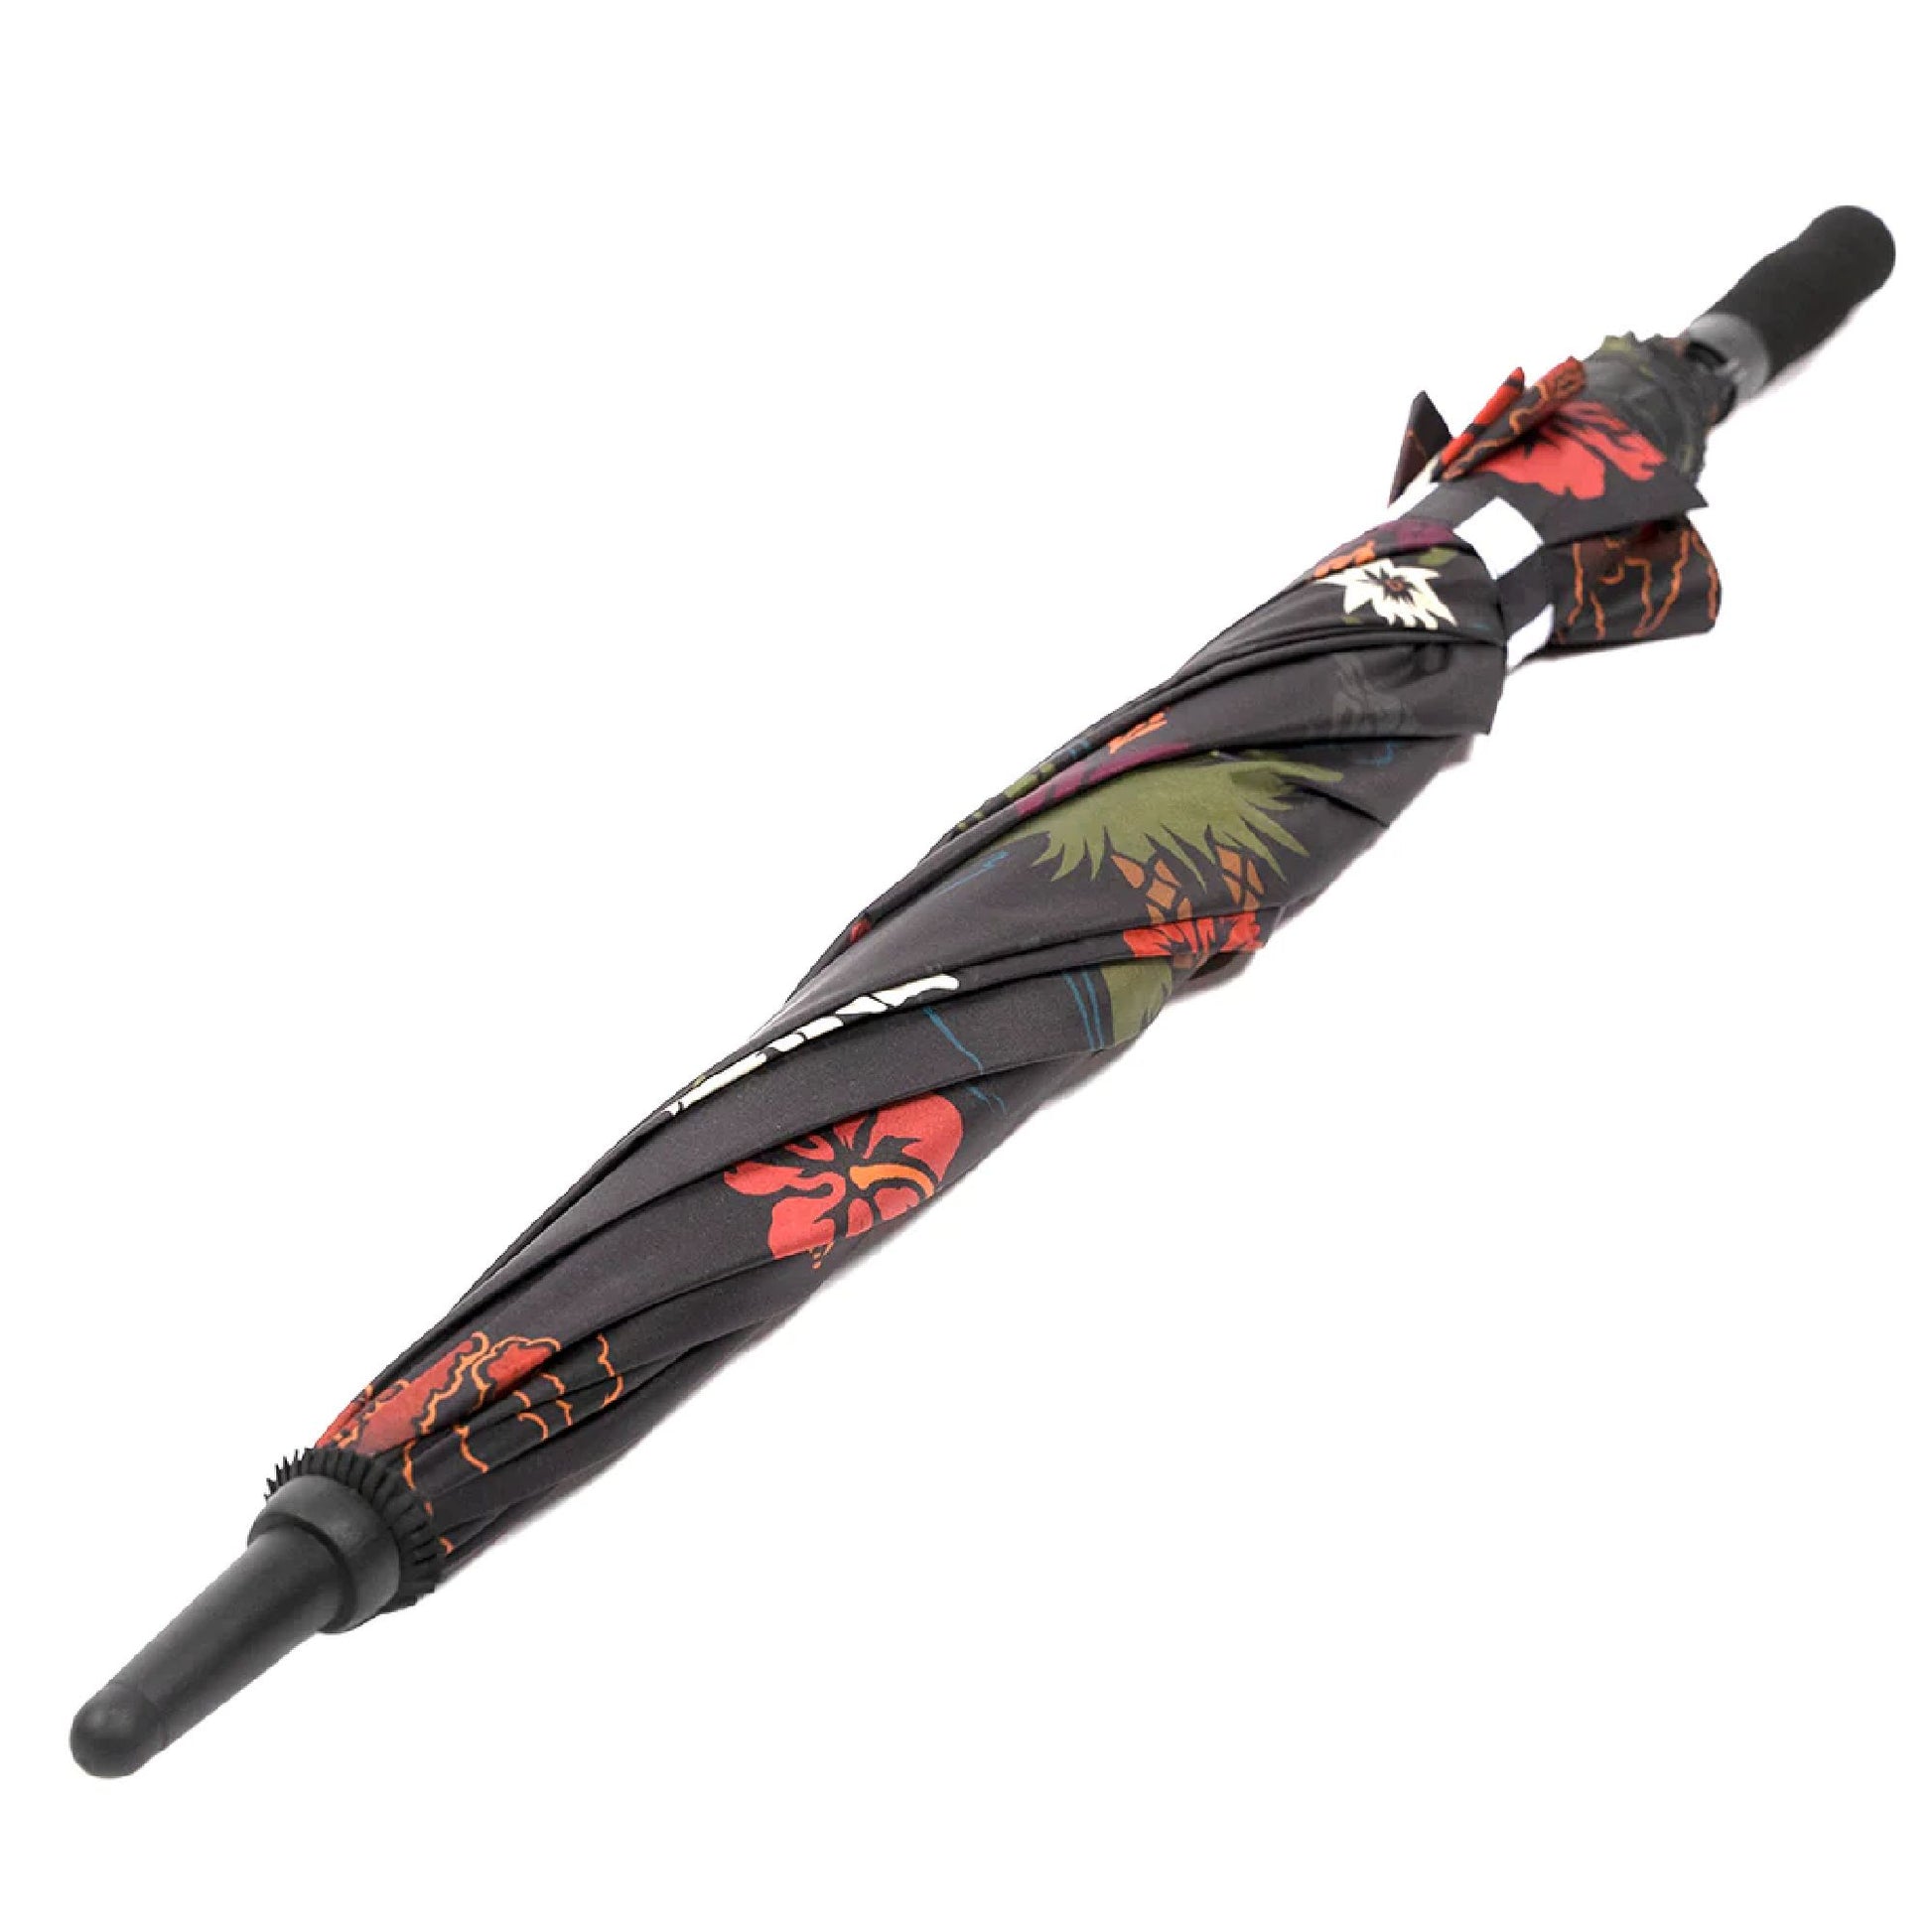 Fasthouse Tribe Umbrella Black OS - Fasthouse Accessories